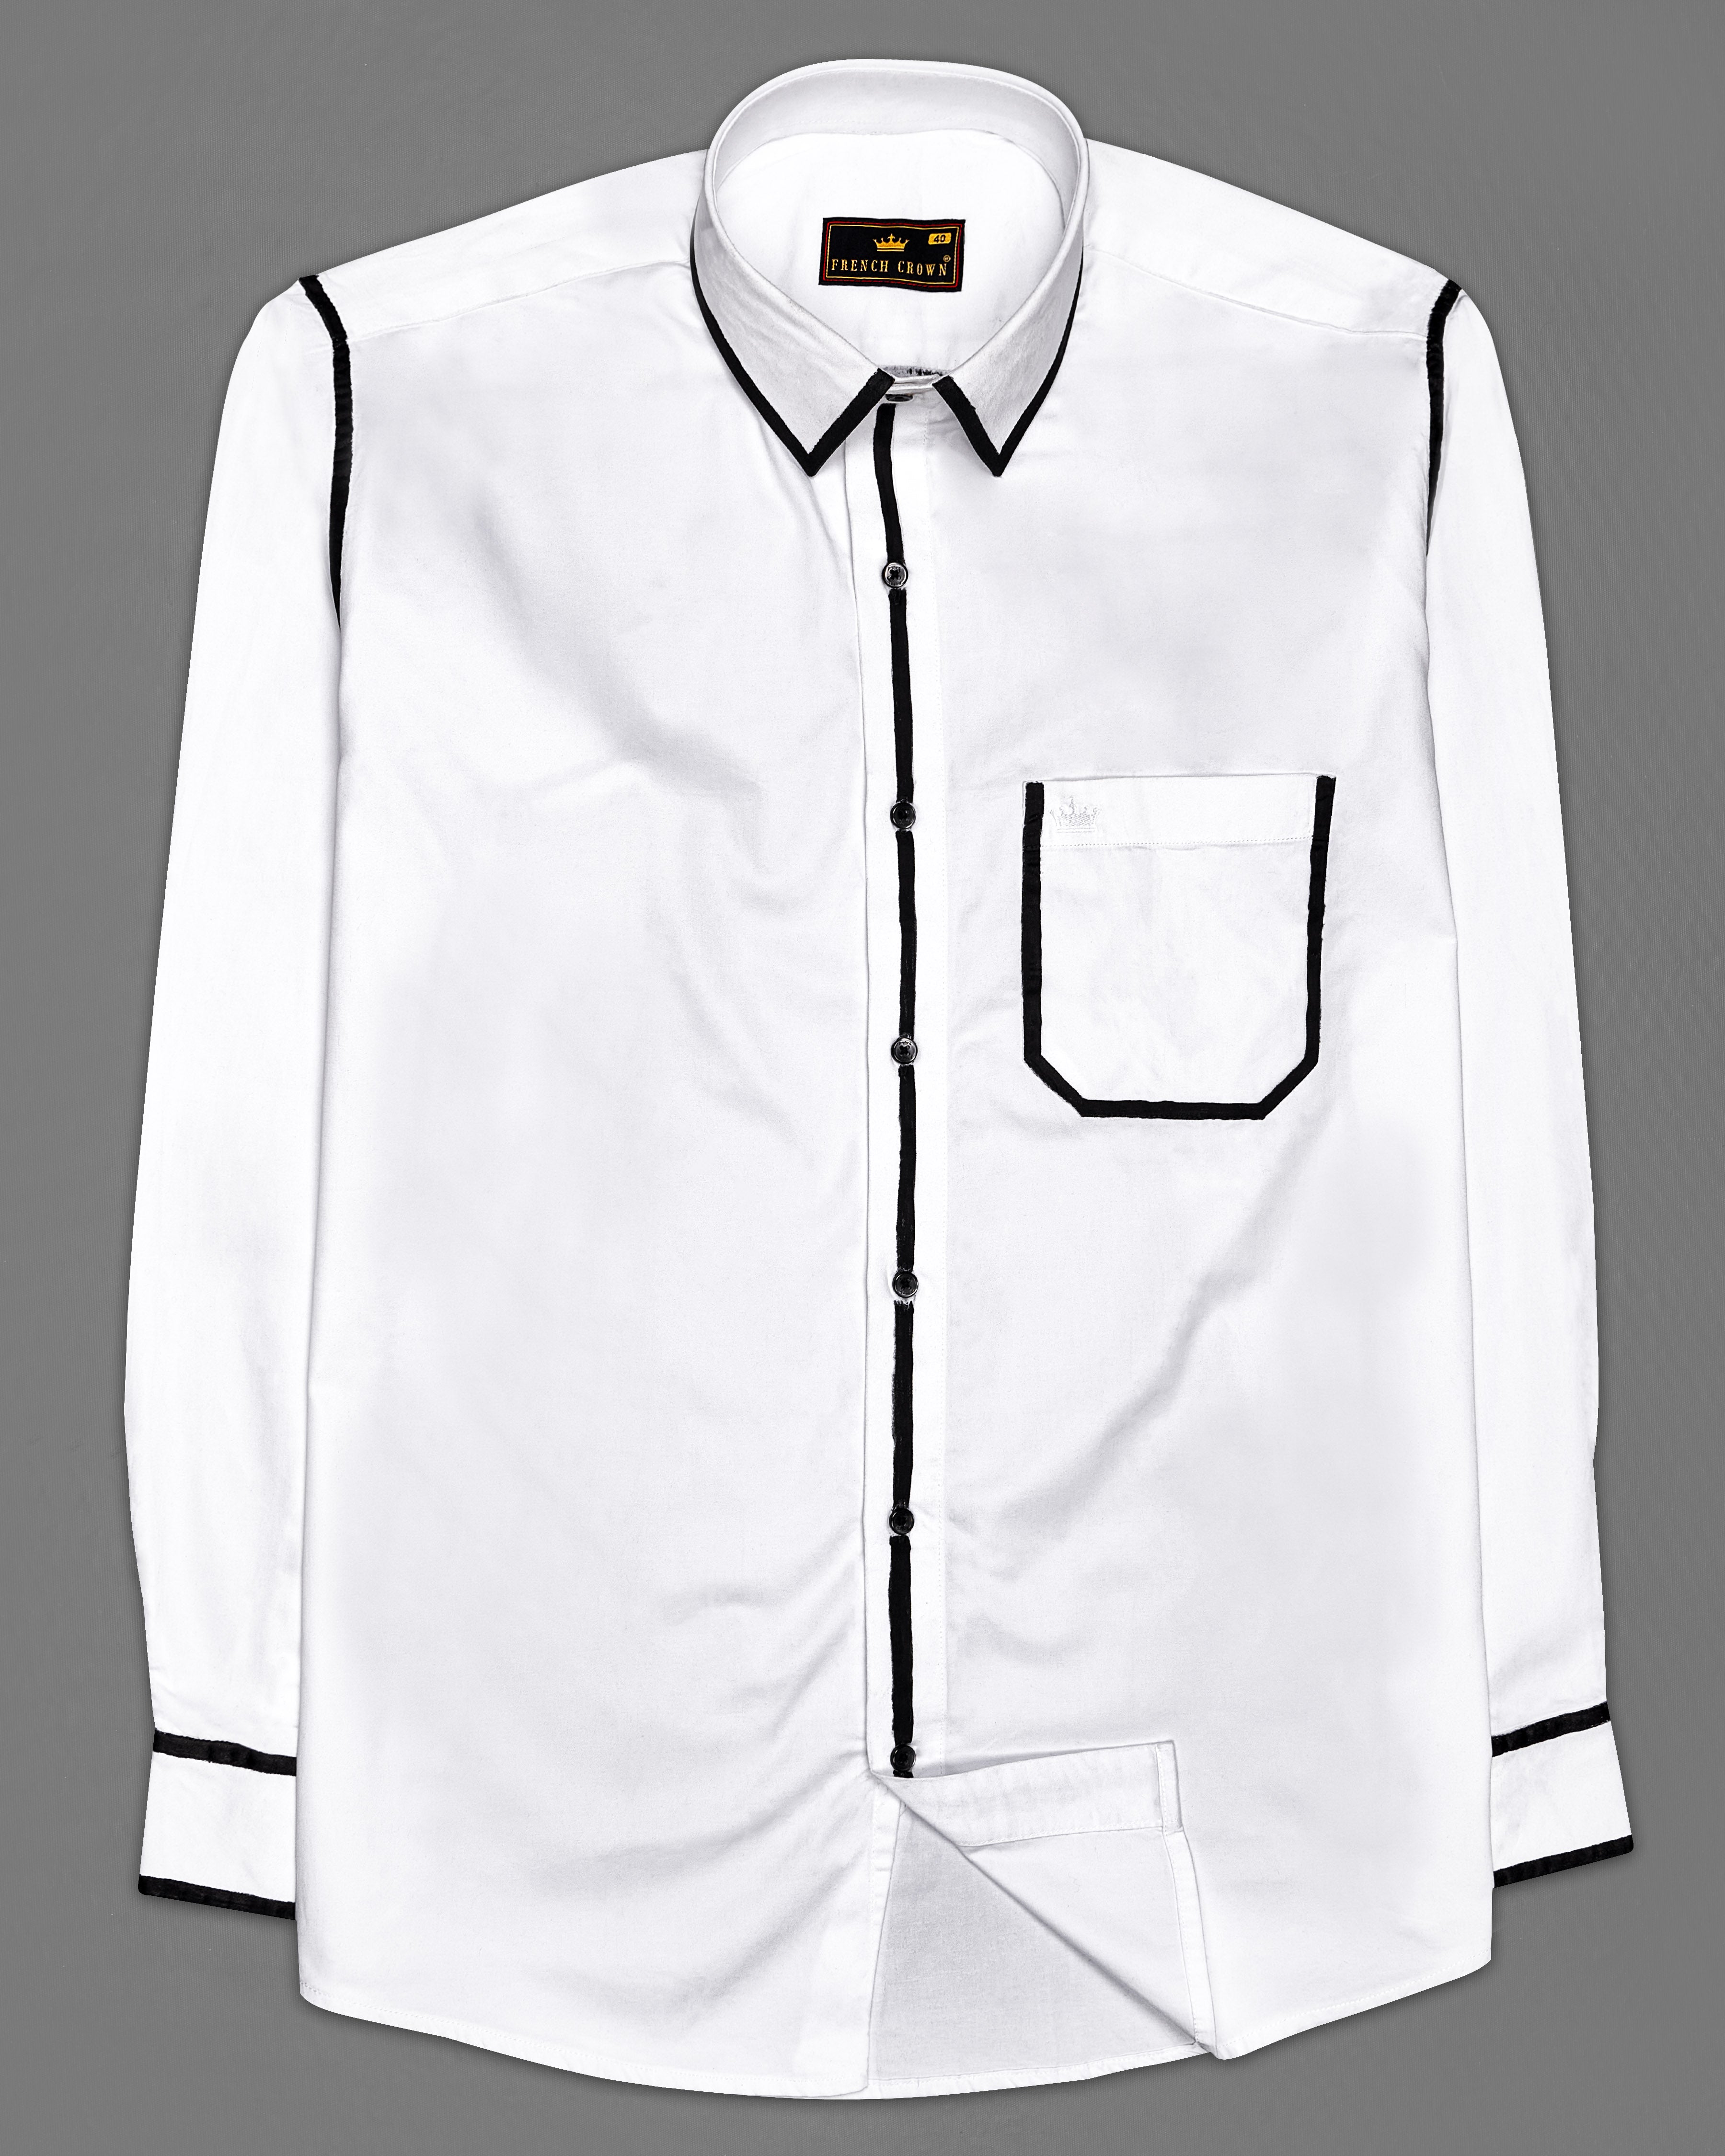 Bright White Subtle Sheen Embellished with Black Hand Painted Lines Super Soft Premium Cotton Designer Shirt 8935-BLK-ART-38,8935-BLK-ART-H-38,8935-BLK-ART-39,8935-BLK-ART-H-39,8935-BLK-ART-40,8935-BLK-ART-H-40,8935-BLK-ART-42,8935-BLK-ART-H-42,8935-BLK-ART-44,8935-BLK-ART-H-44,8935-BLK-ART-46,8935-BLK-ART-H-46,8935-BLK-ART-48,8935-BLK-ART-H-48,8935-BLK-ART-50,8935-BLK-ART-H-50,8935-BLK-ART-52,8935-BLK-ART-H-52